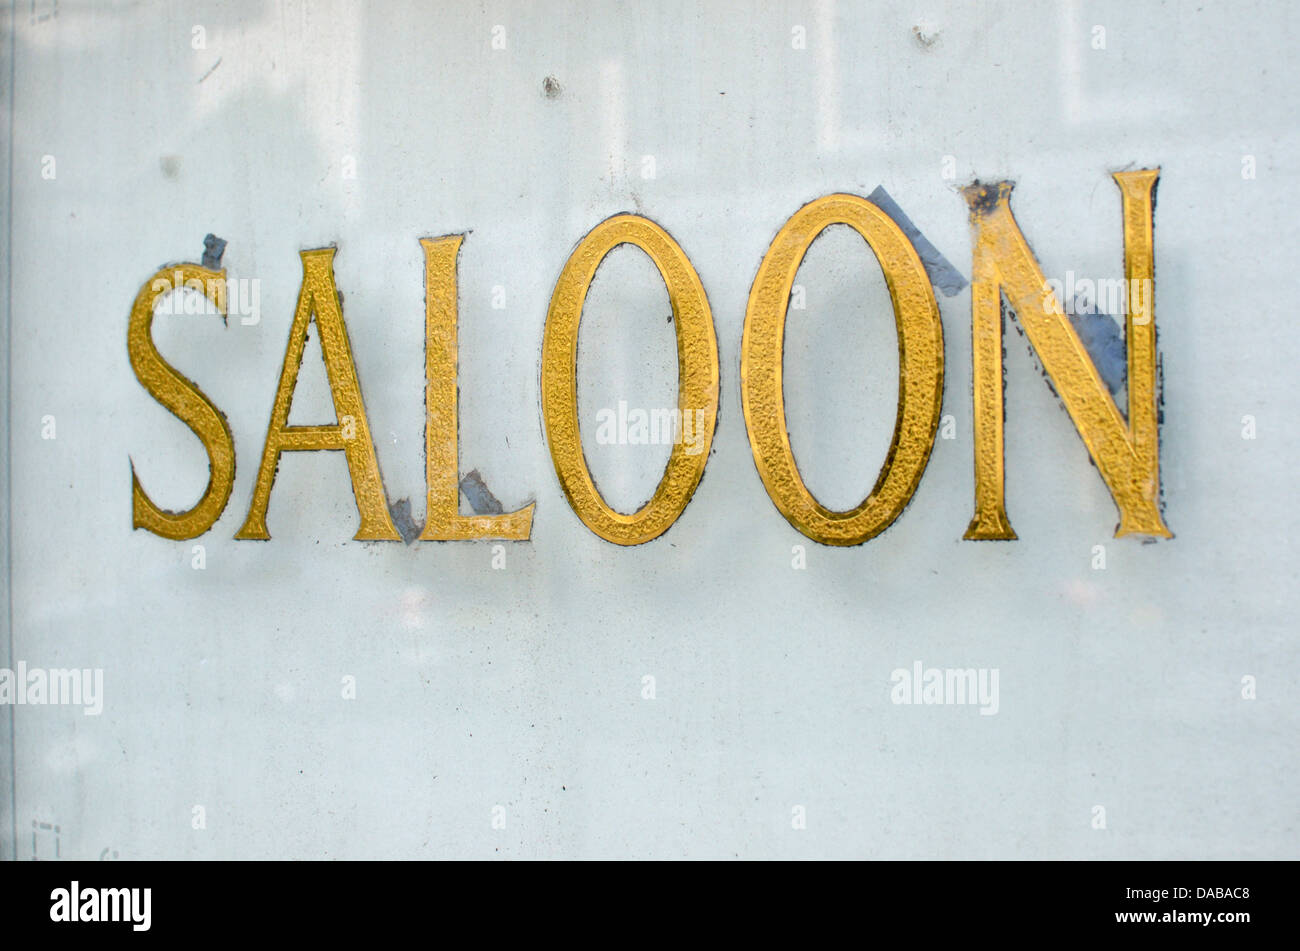 Close-up of an old 'Saloon' sign on a pub window Stock Photo